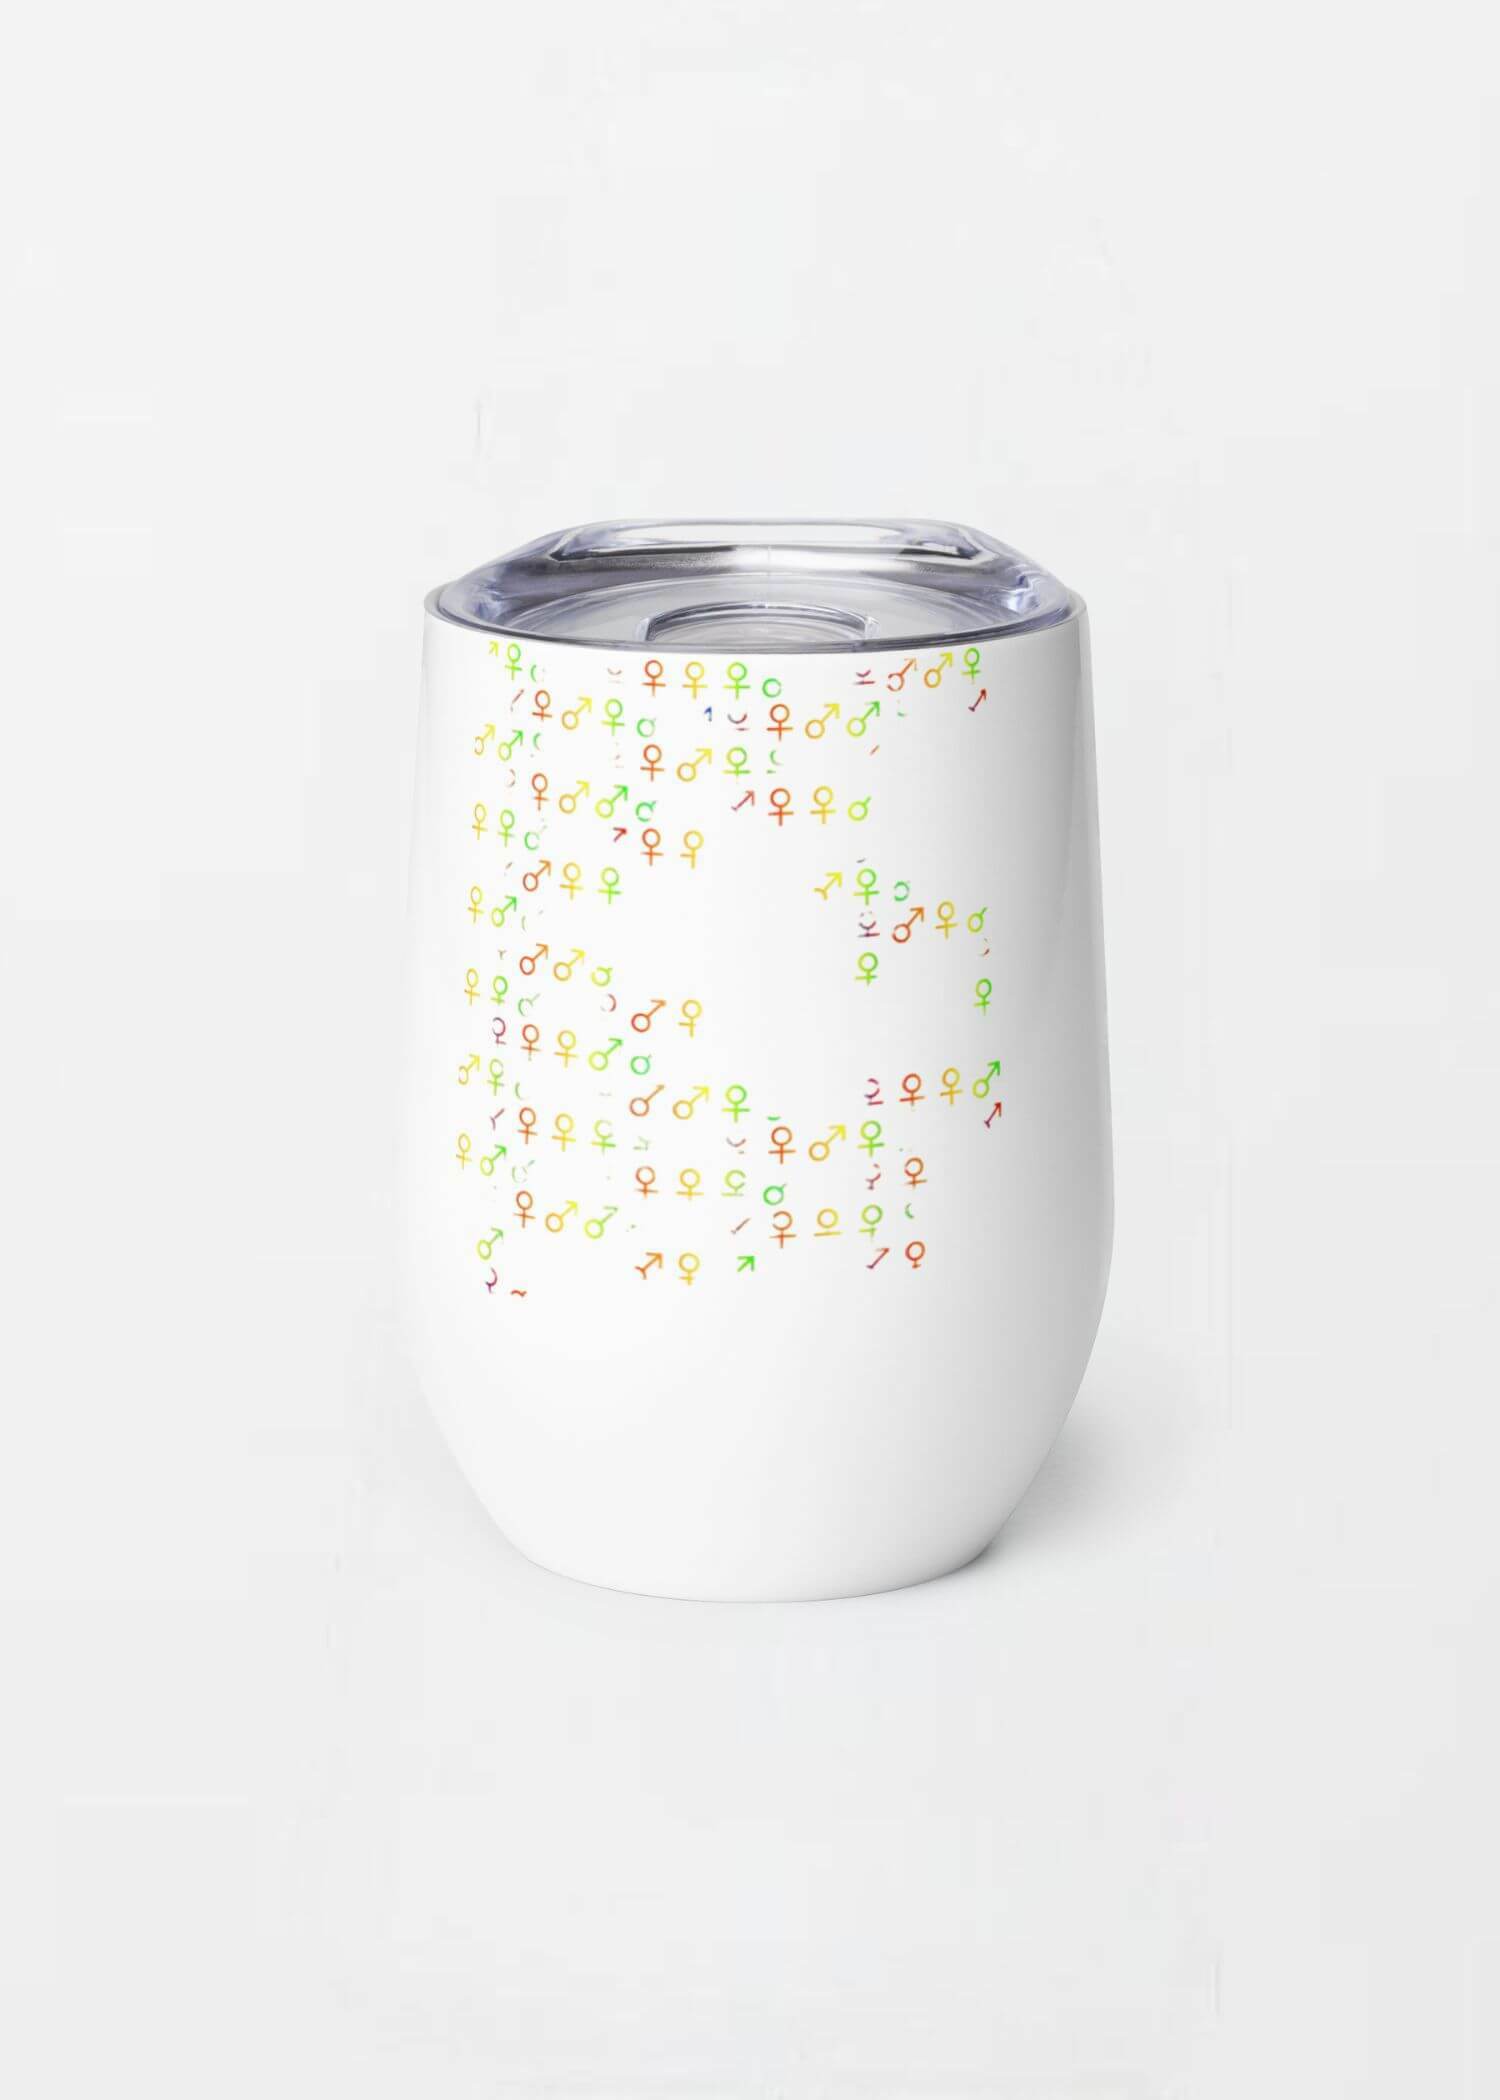 Unisex Tumbler transparent miteigi-logo design stainless steel wine, milk drinks tumblers with lid Outdoor sports fitness drinkware in white with gender symbols pattern